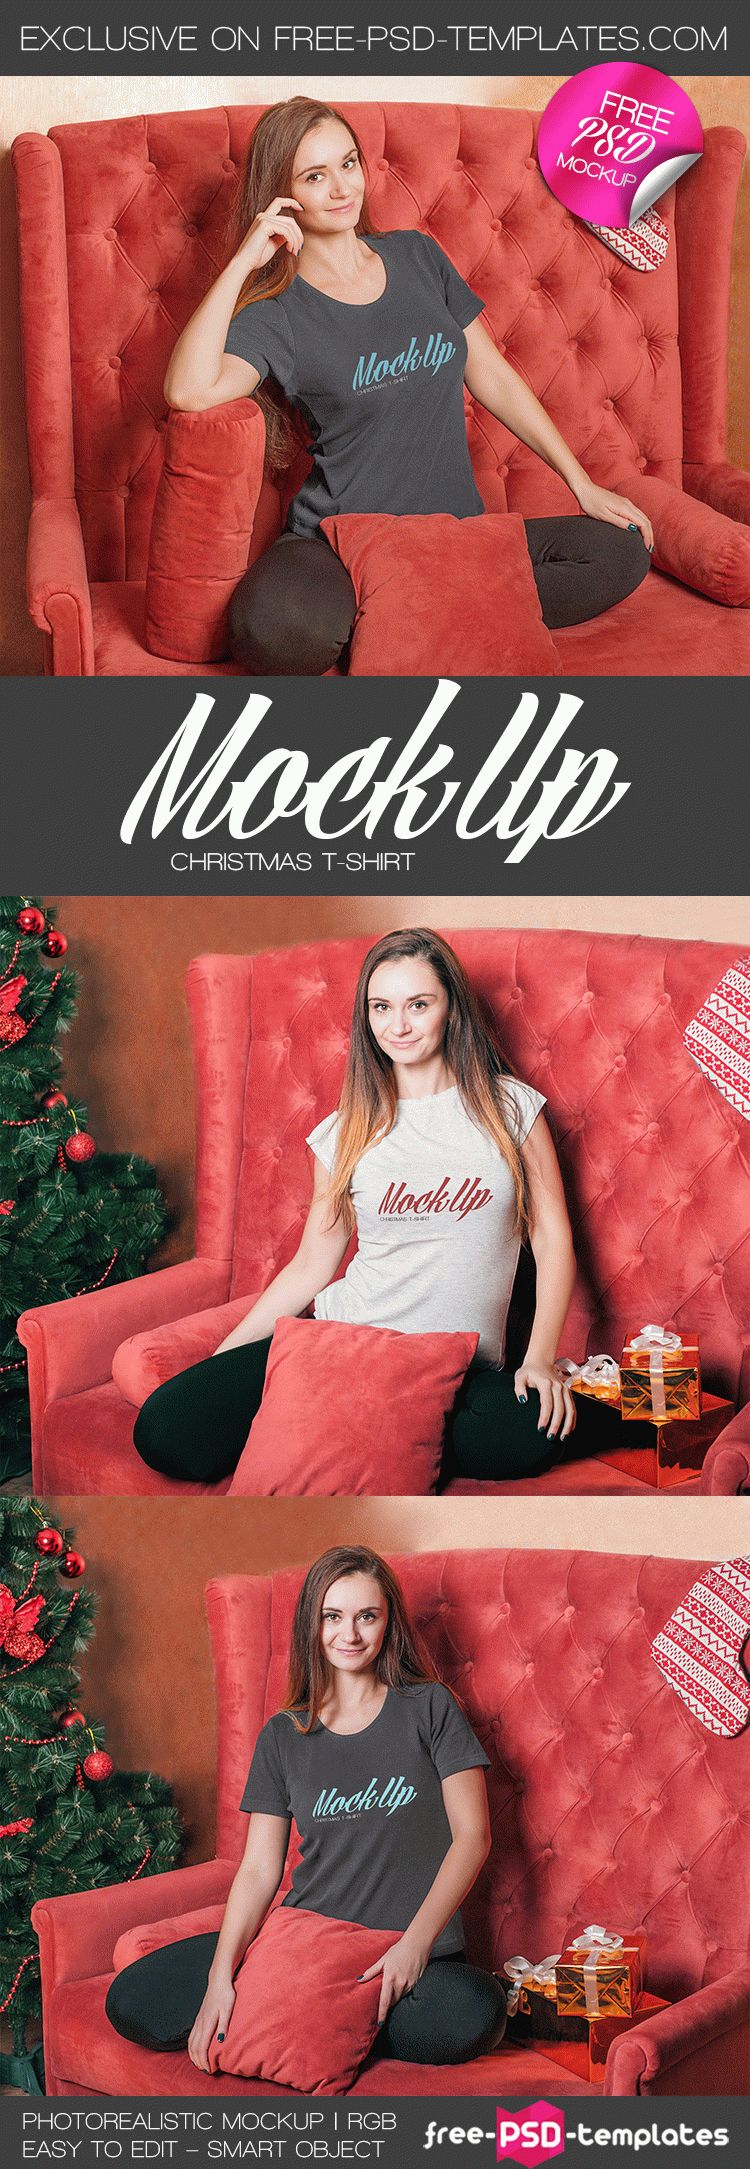 Download Free Christmas T-Shirt Mock-up in PSD | Free PSD Templates